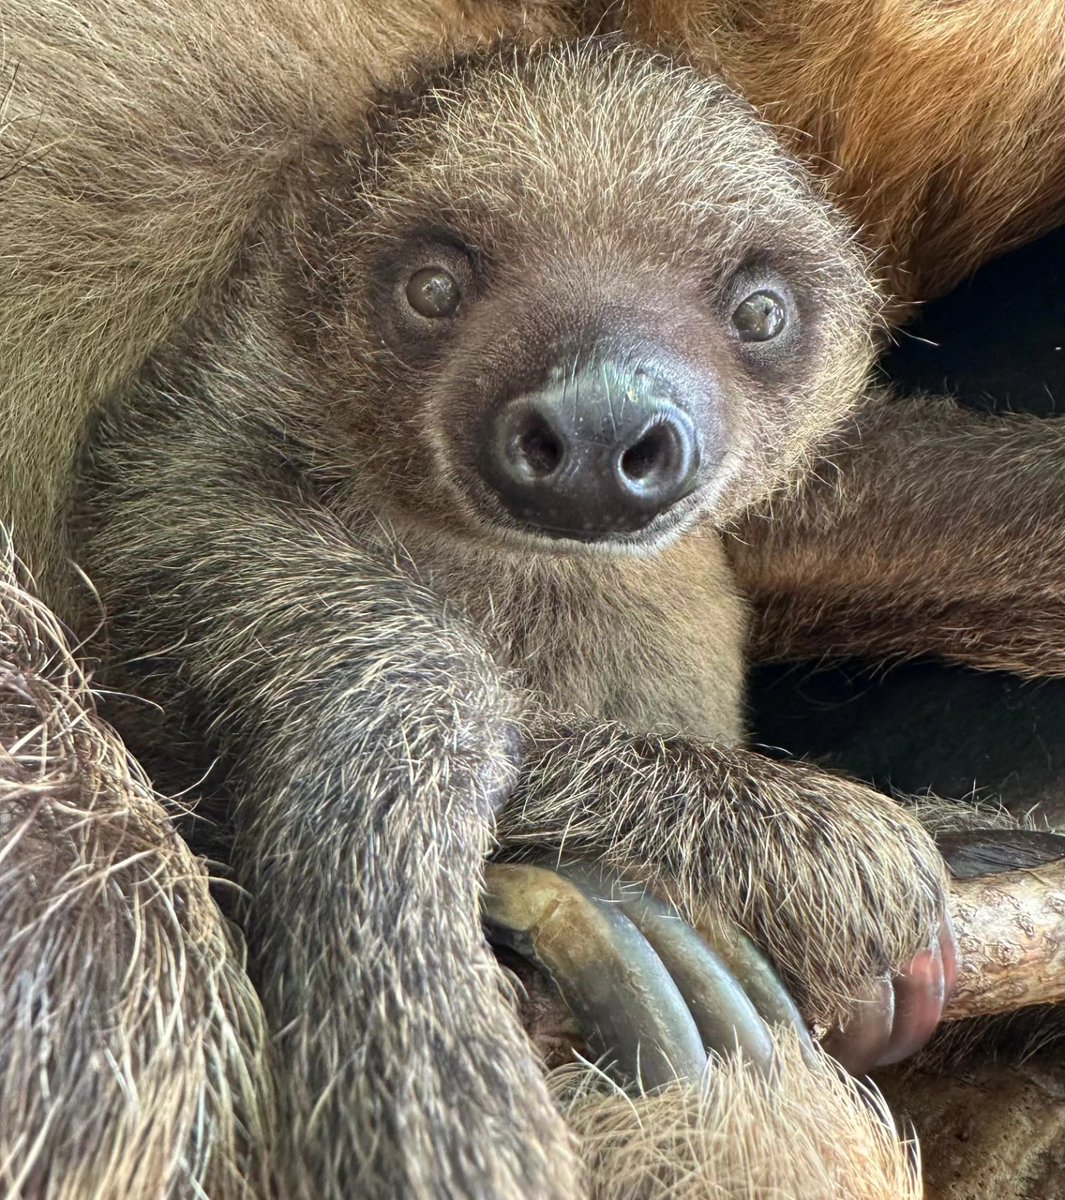 Could this little furball BE any cuter? Asking for a friend (who is definitely us). Come say hi to Jeffrey and all his rainforest pals during our half-price winter days! It's the perfect chance to warm up with some jungle cuteness.